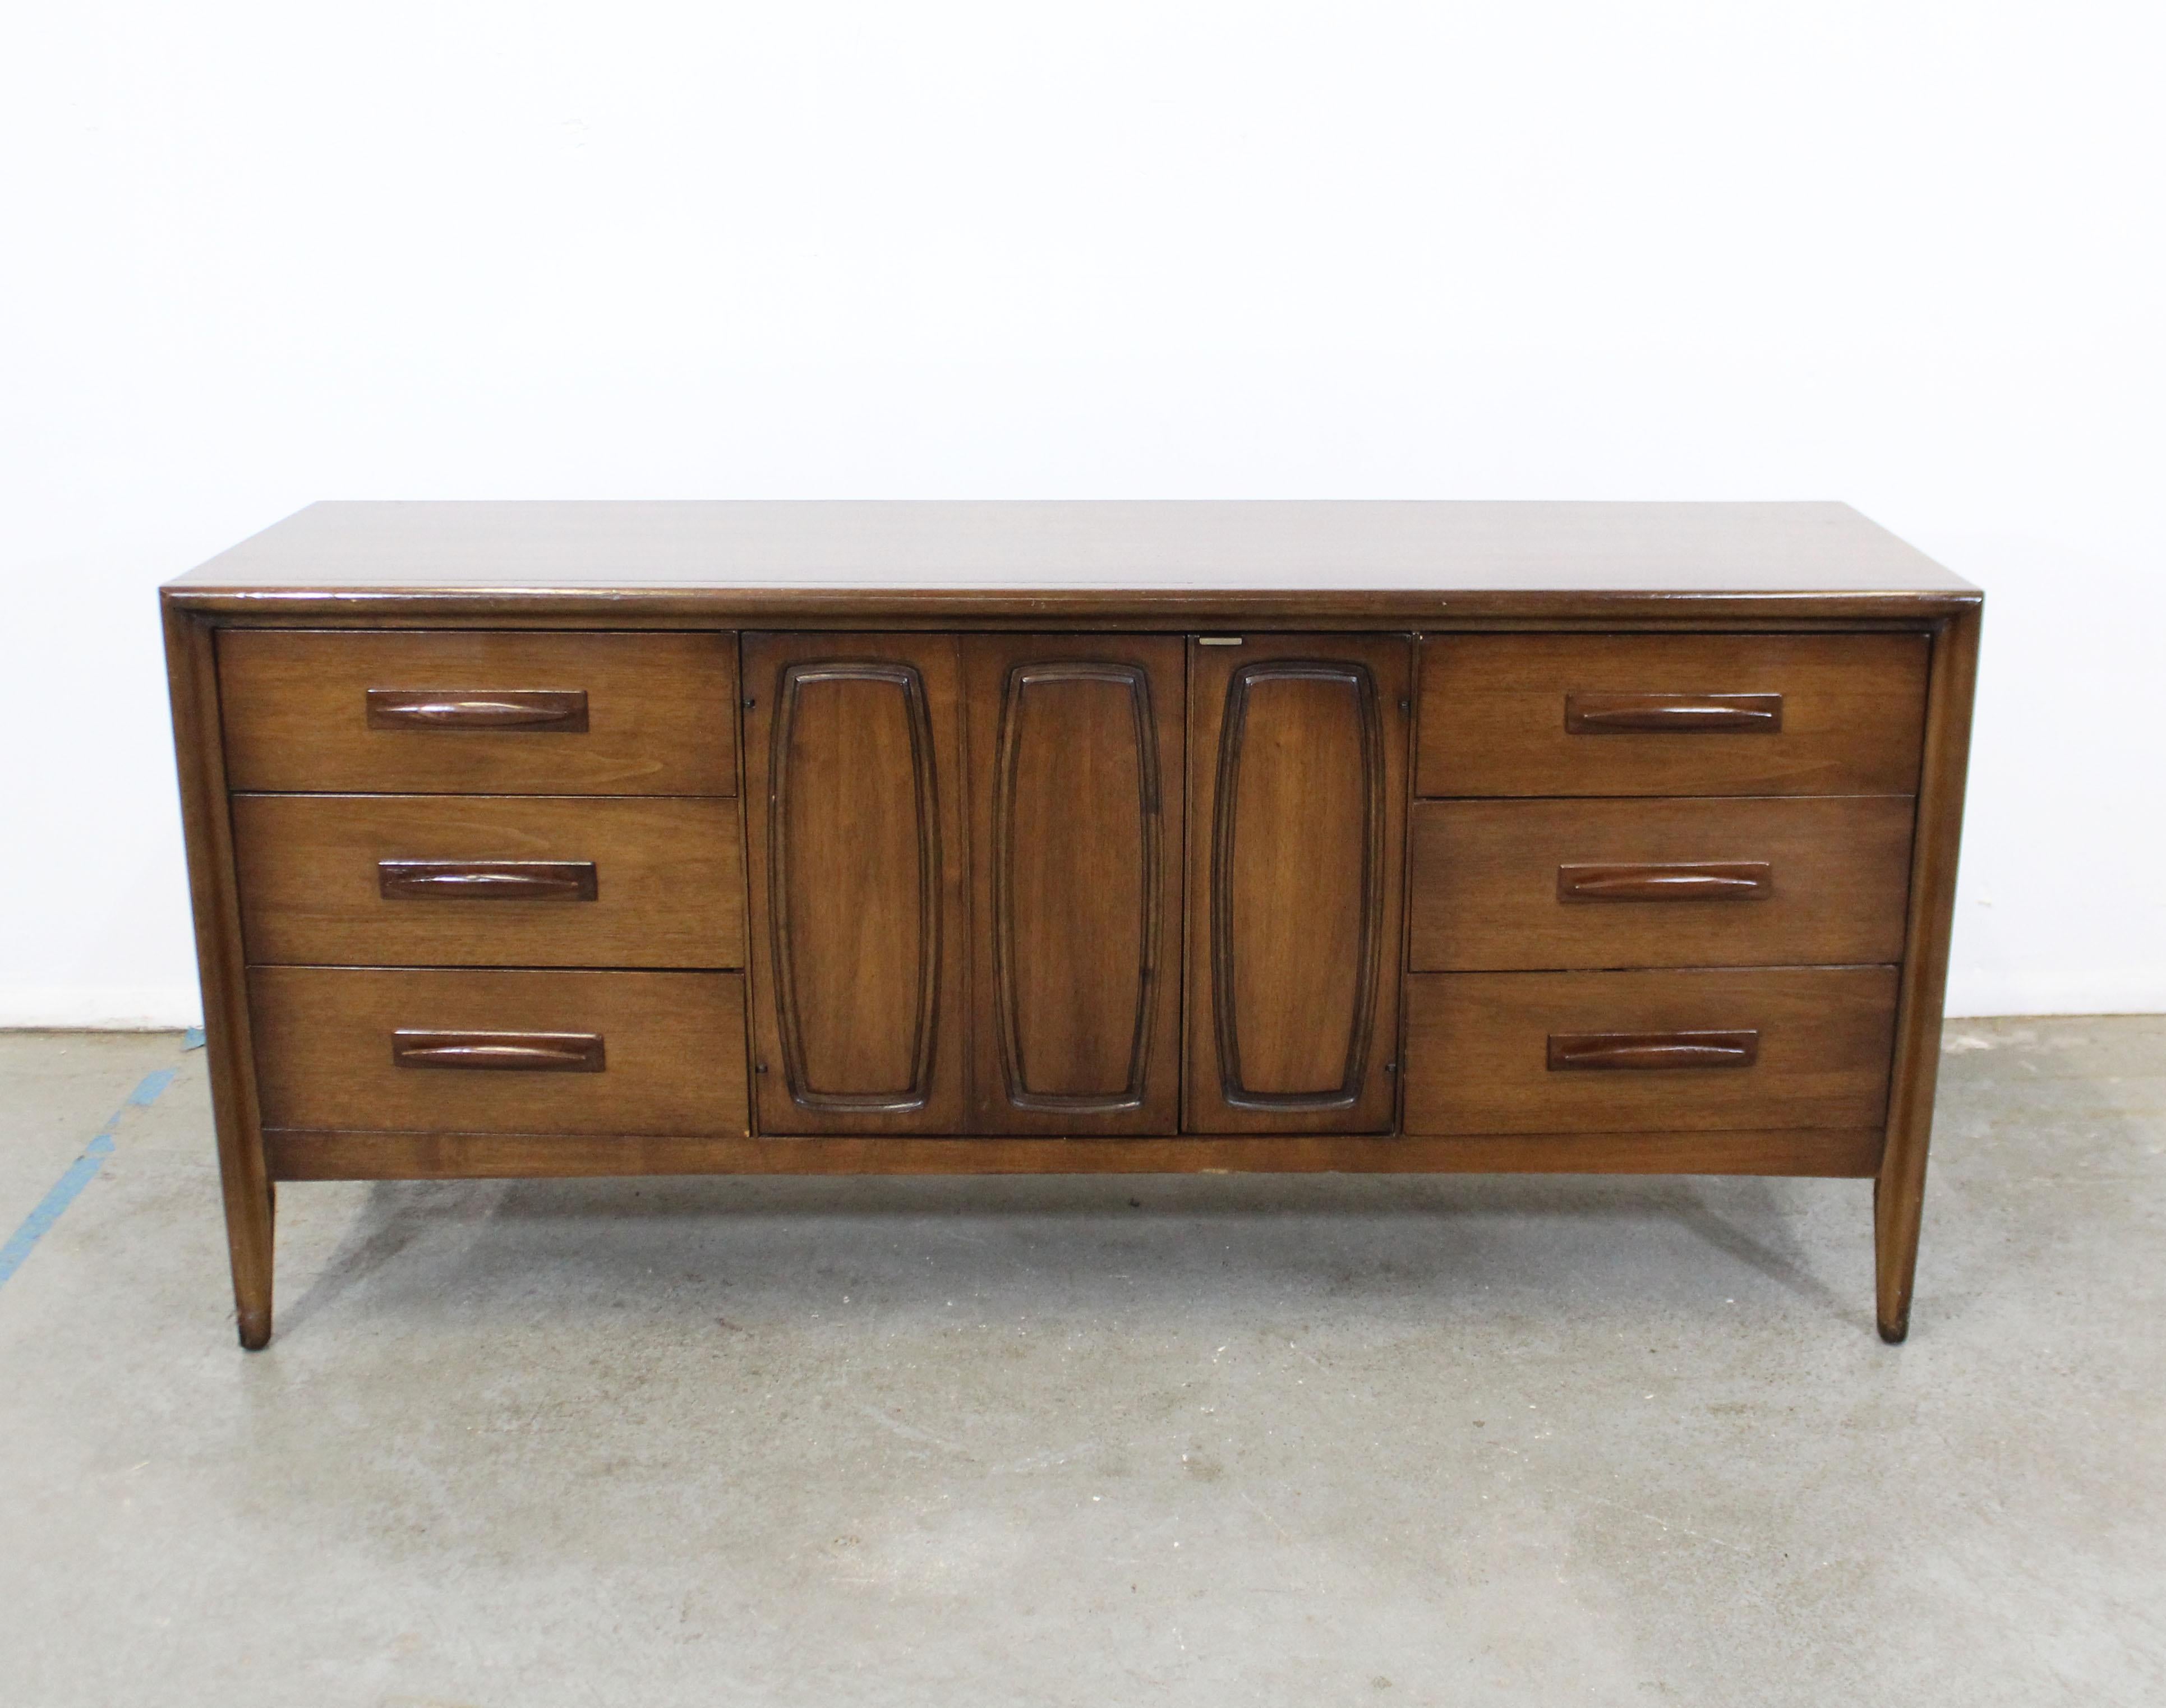 Offered is a vintage midcentury walnut credenza by Broyhill 